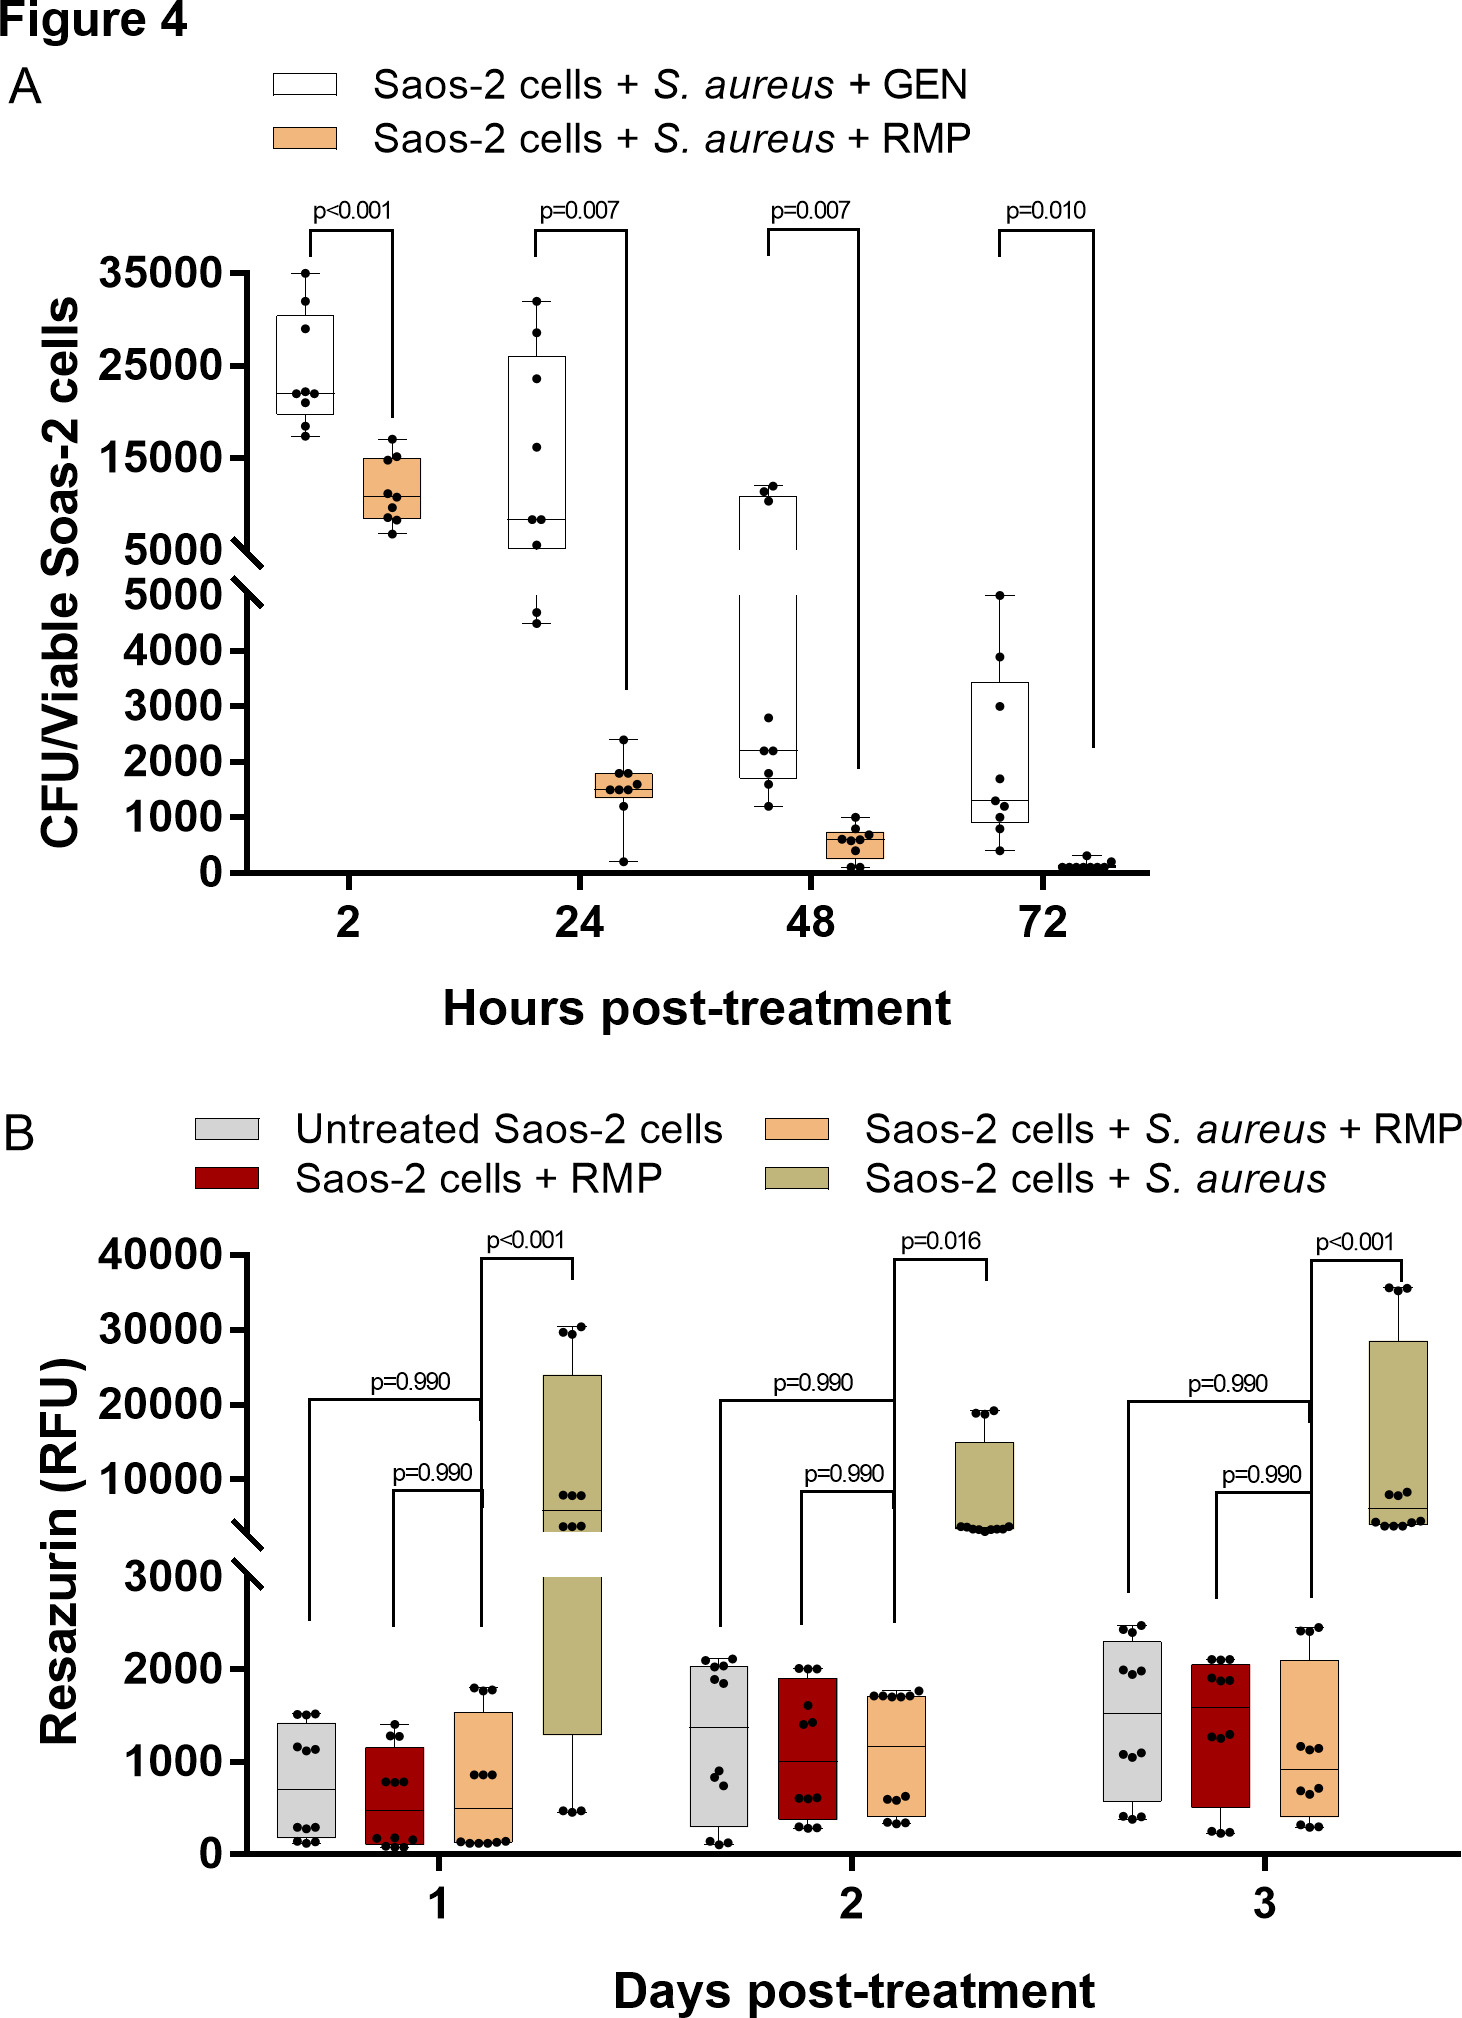 Fig. 4 
            High efficacy of rifampicin (RMP) in the eradication of the intracellular bacteria burden. a) Treatment of Staphylococcus aureus-infected osteoblasts with a single dosage of 8 µg/ml RMP substantially reduced the intracellular S. aureus burden as early as two hours post-treatment. Viable intracellular bacteria colony significantly decreased over time; n = 3; multiple t-test using the Holm-Sidak method. b) Treatment of S. aureus-infected osteoblasts with a single dosage of 8 µg/ml RMP enabled the restoration of host cell metabolism. The rifampicin-treated infected cells showed comparable metabolic activity to the uninfected control groups; n = 4; two-way analysis of variance (ANOVA) with Tukey’s multiple comparisons test. CFU, colony-forming units; GEN, gentamicin; RFU, resorufin fluorescence unit.
          